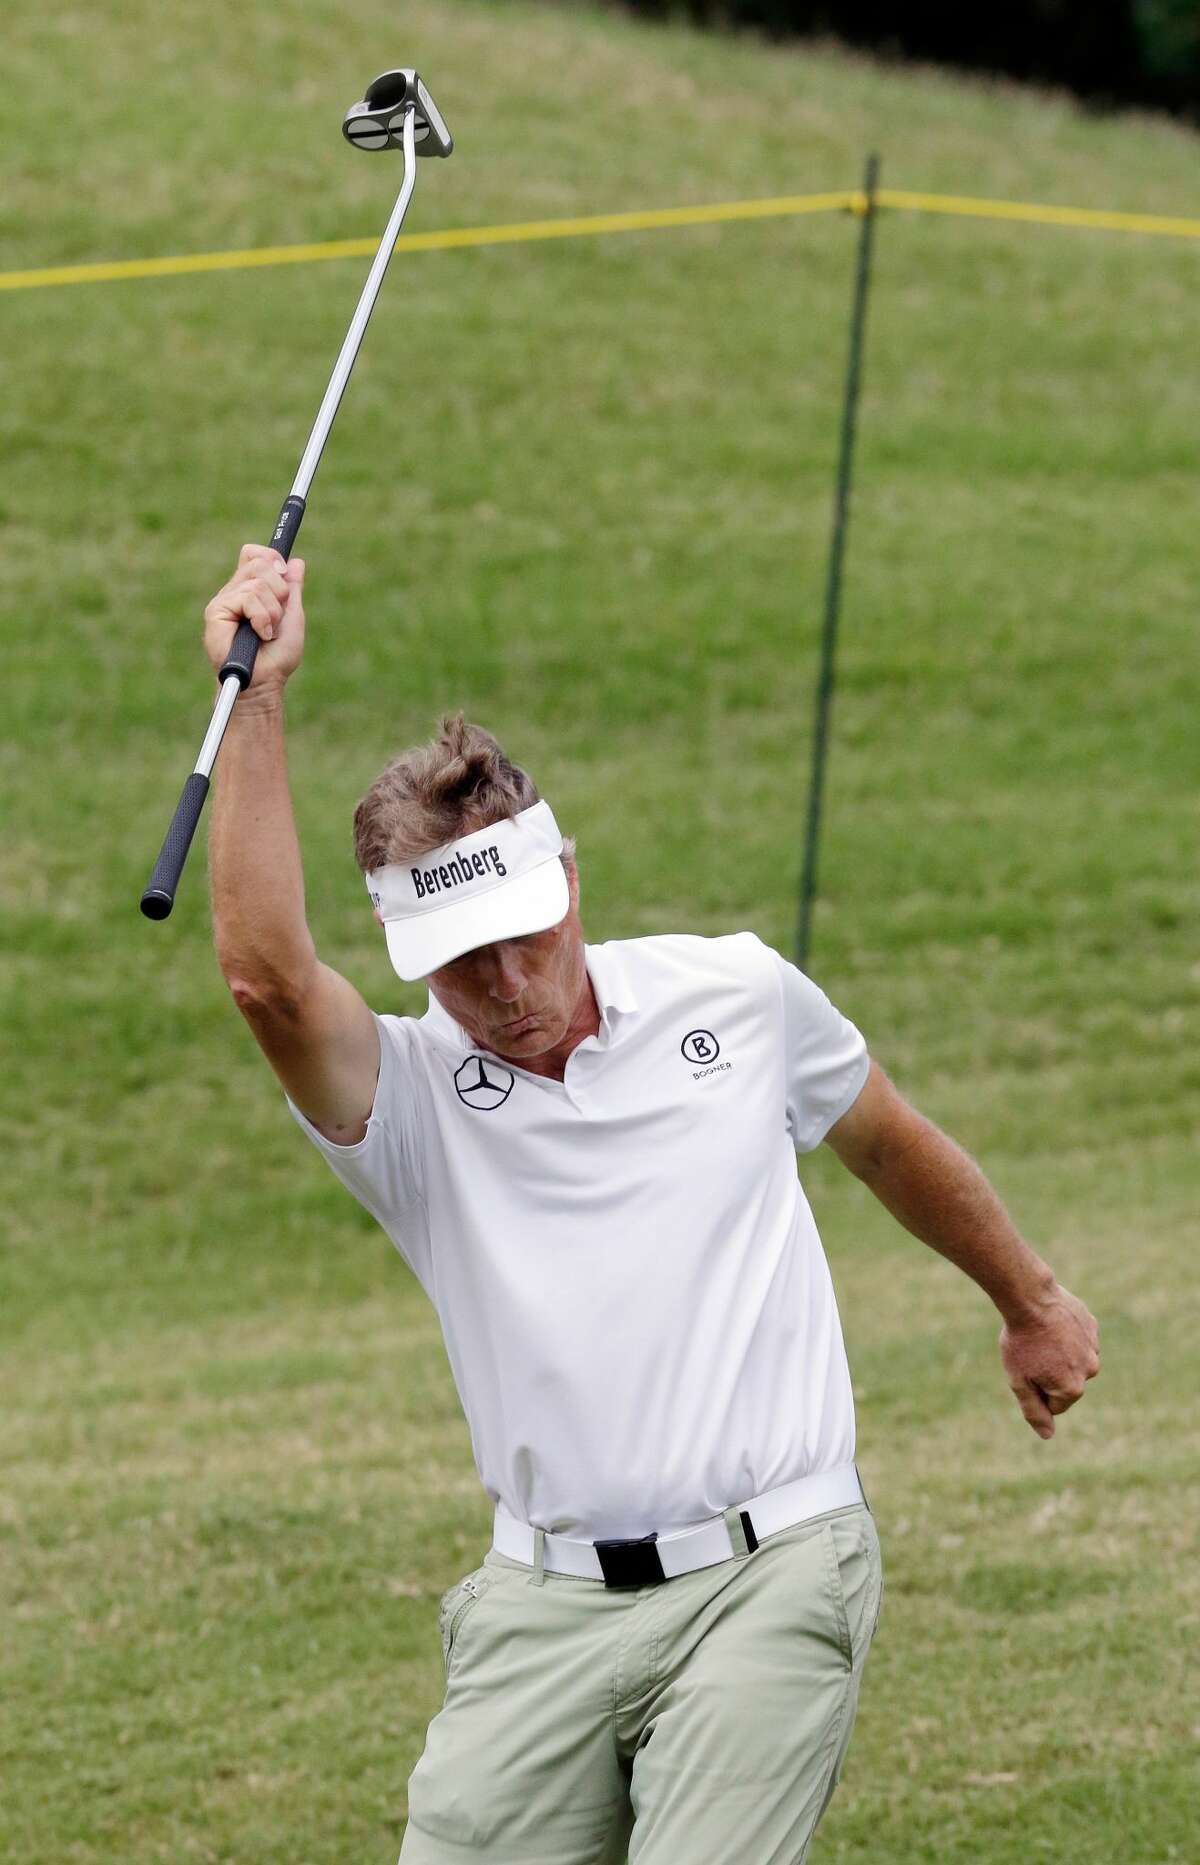 Bernhard Langer reacts to his birdie, putting him nine under on the 16th green during the first round of the Insperity Invitational at the The Woodlands Country Club Friday, May 4, 2018, in The Woodlands, TX. (Michael Wyke / For the Chronicle)